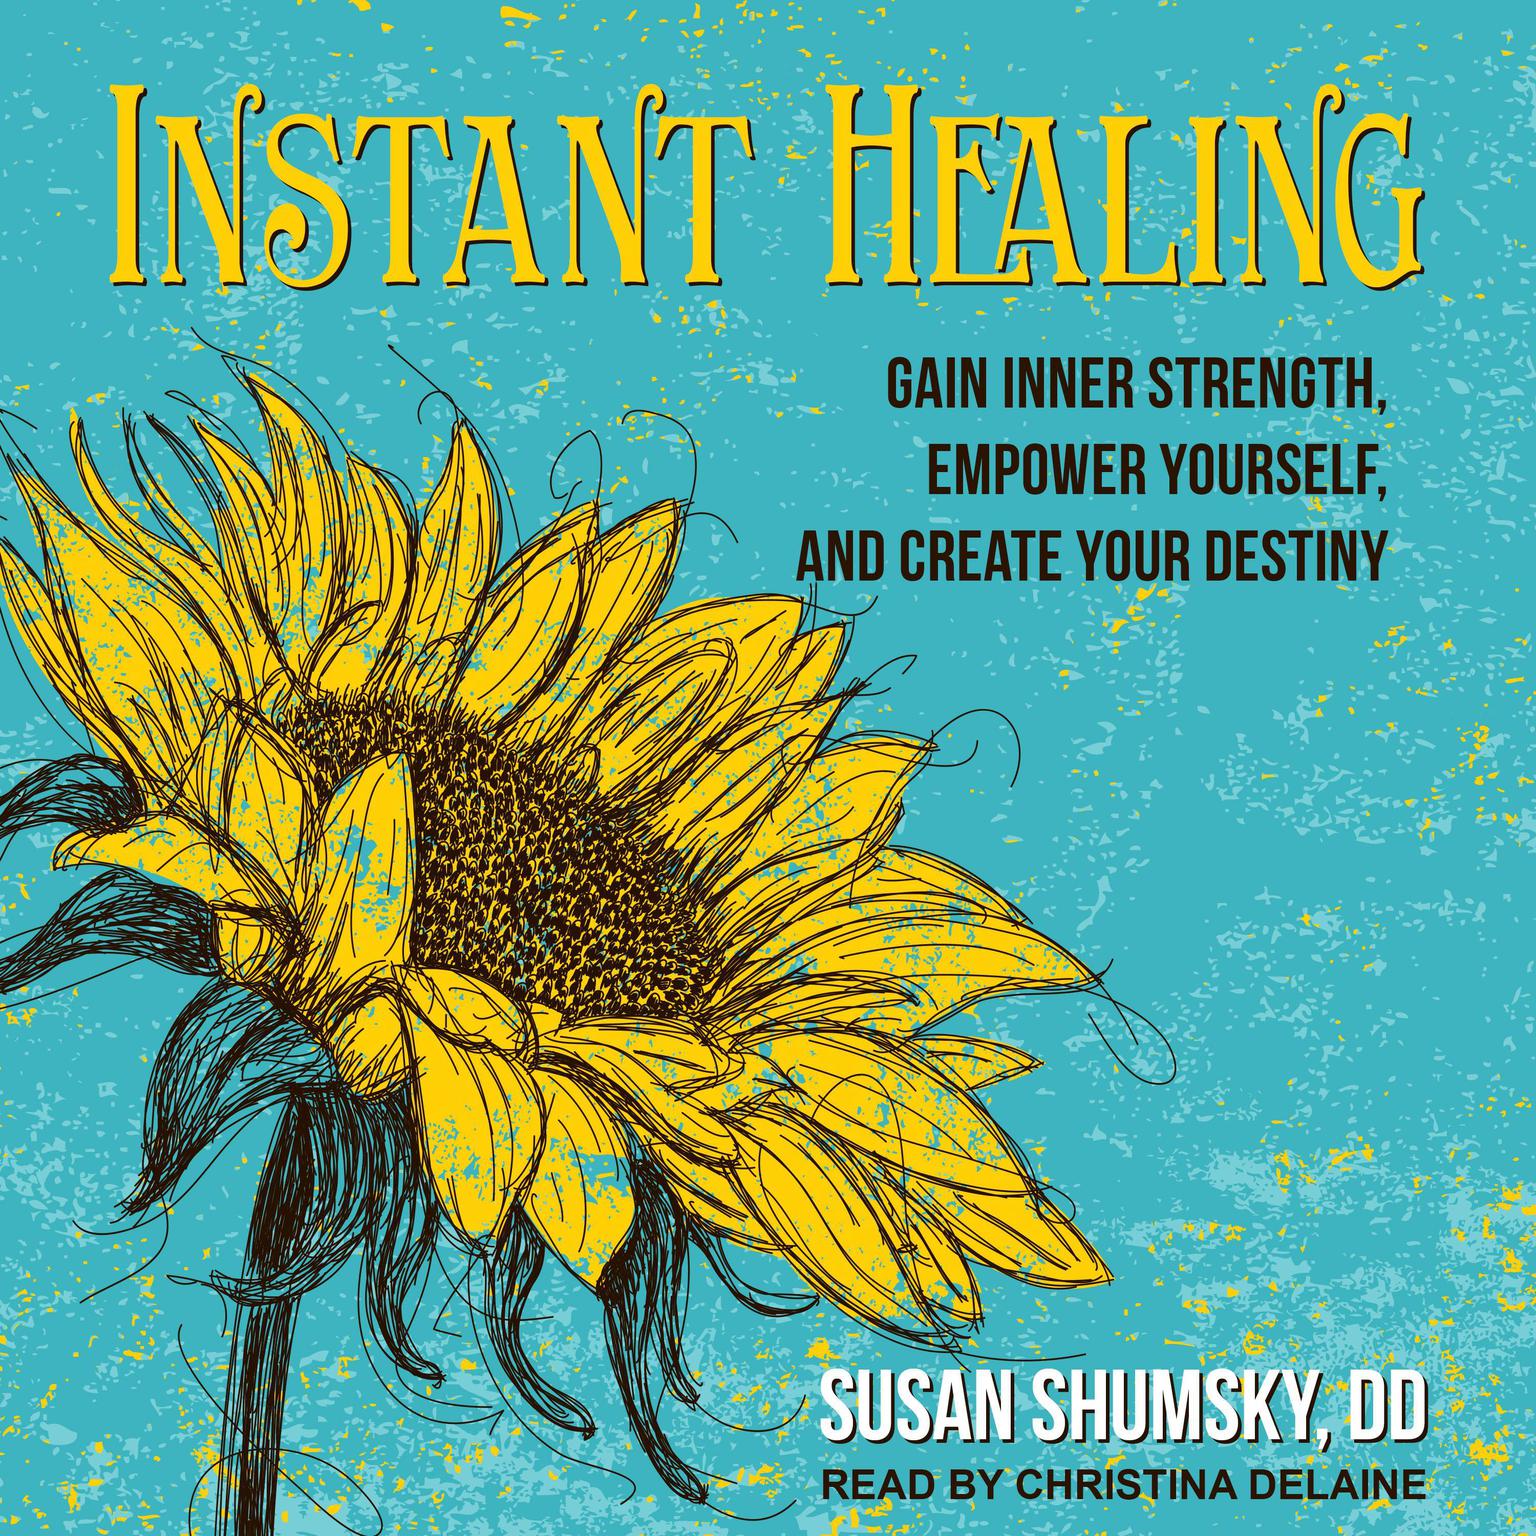 Instant Healing: Gain Inner Strength, Empower Yourself, and Create Your Destiny Audiobook, by Susan Shumsky, DD